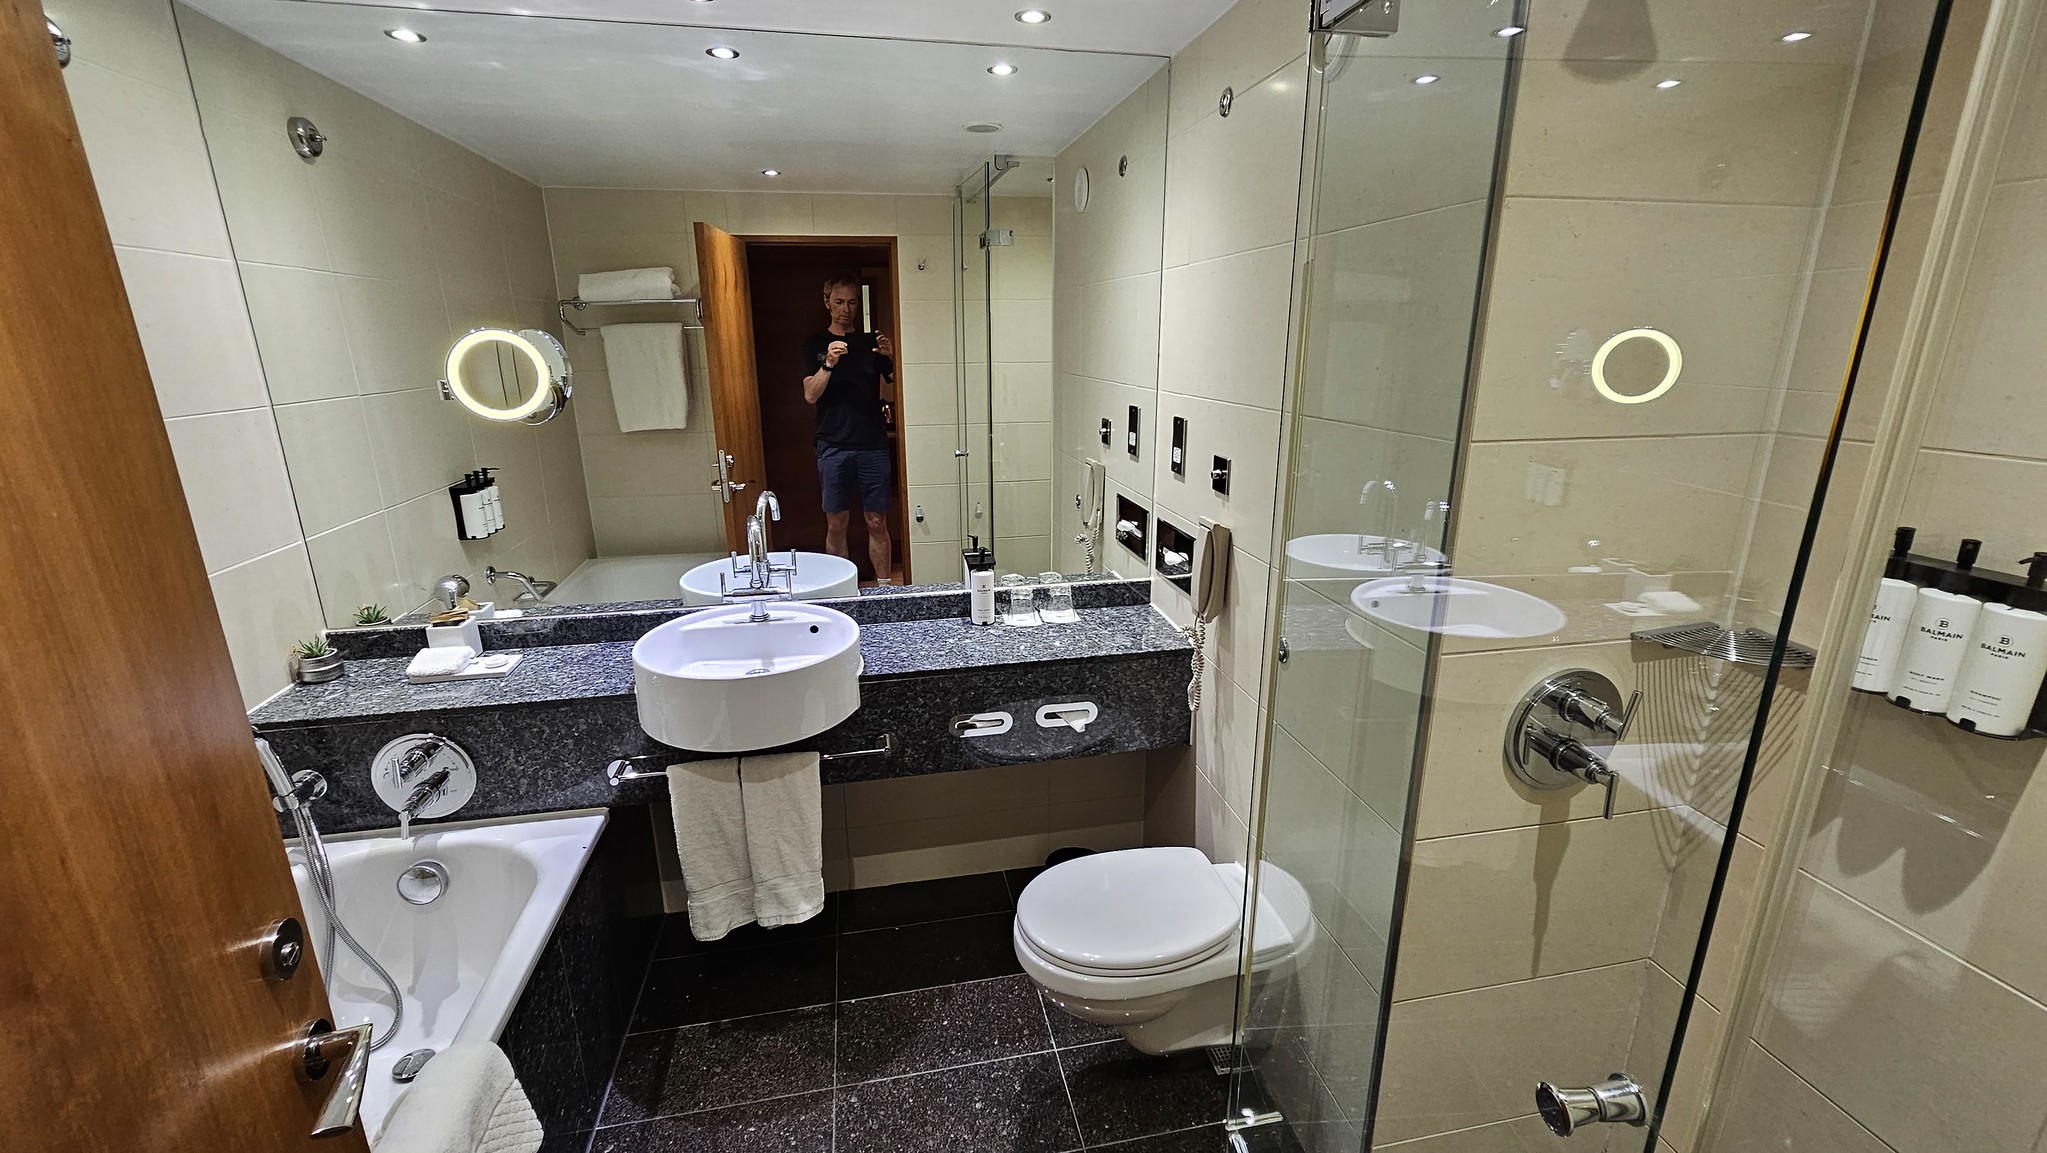 Our ensuite at the Sofitel at Heathrow